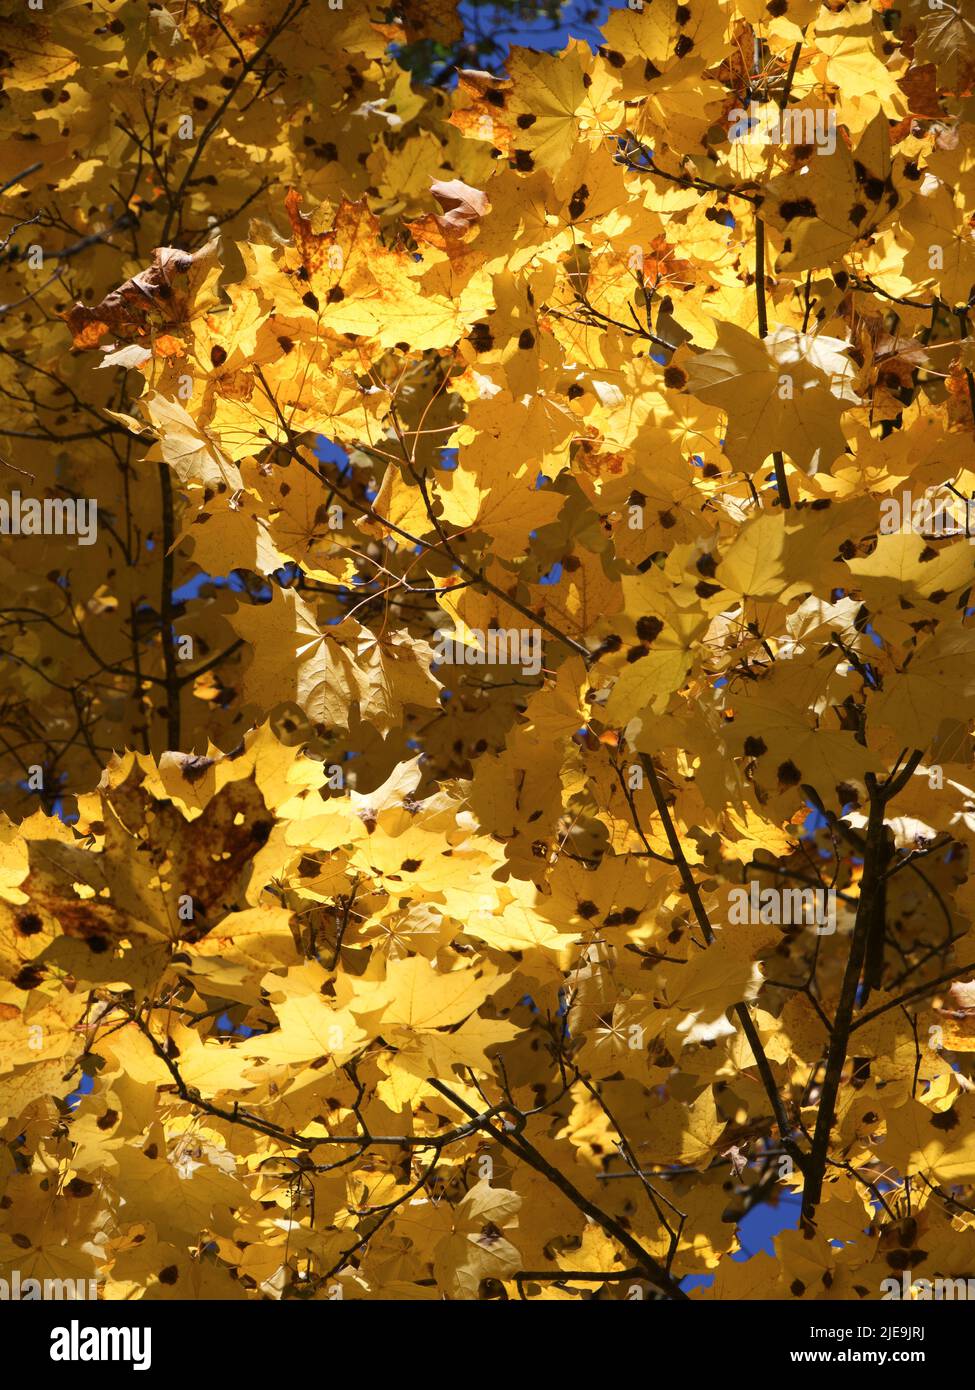 There are many golden maple leaves on the branches of the tree.  Dry autumn leaves Stock Photo